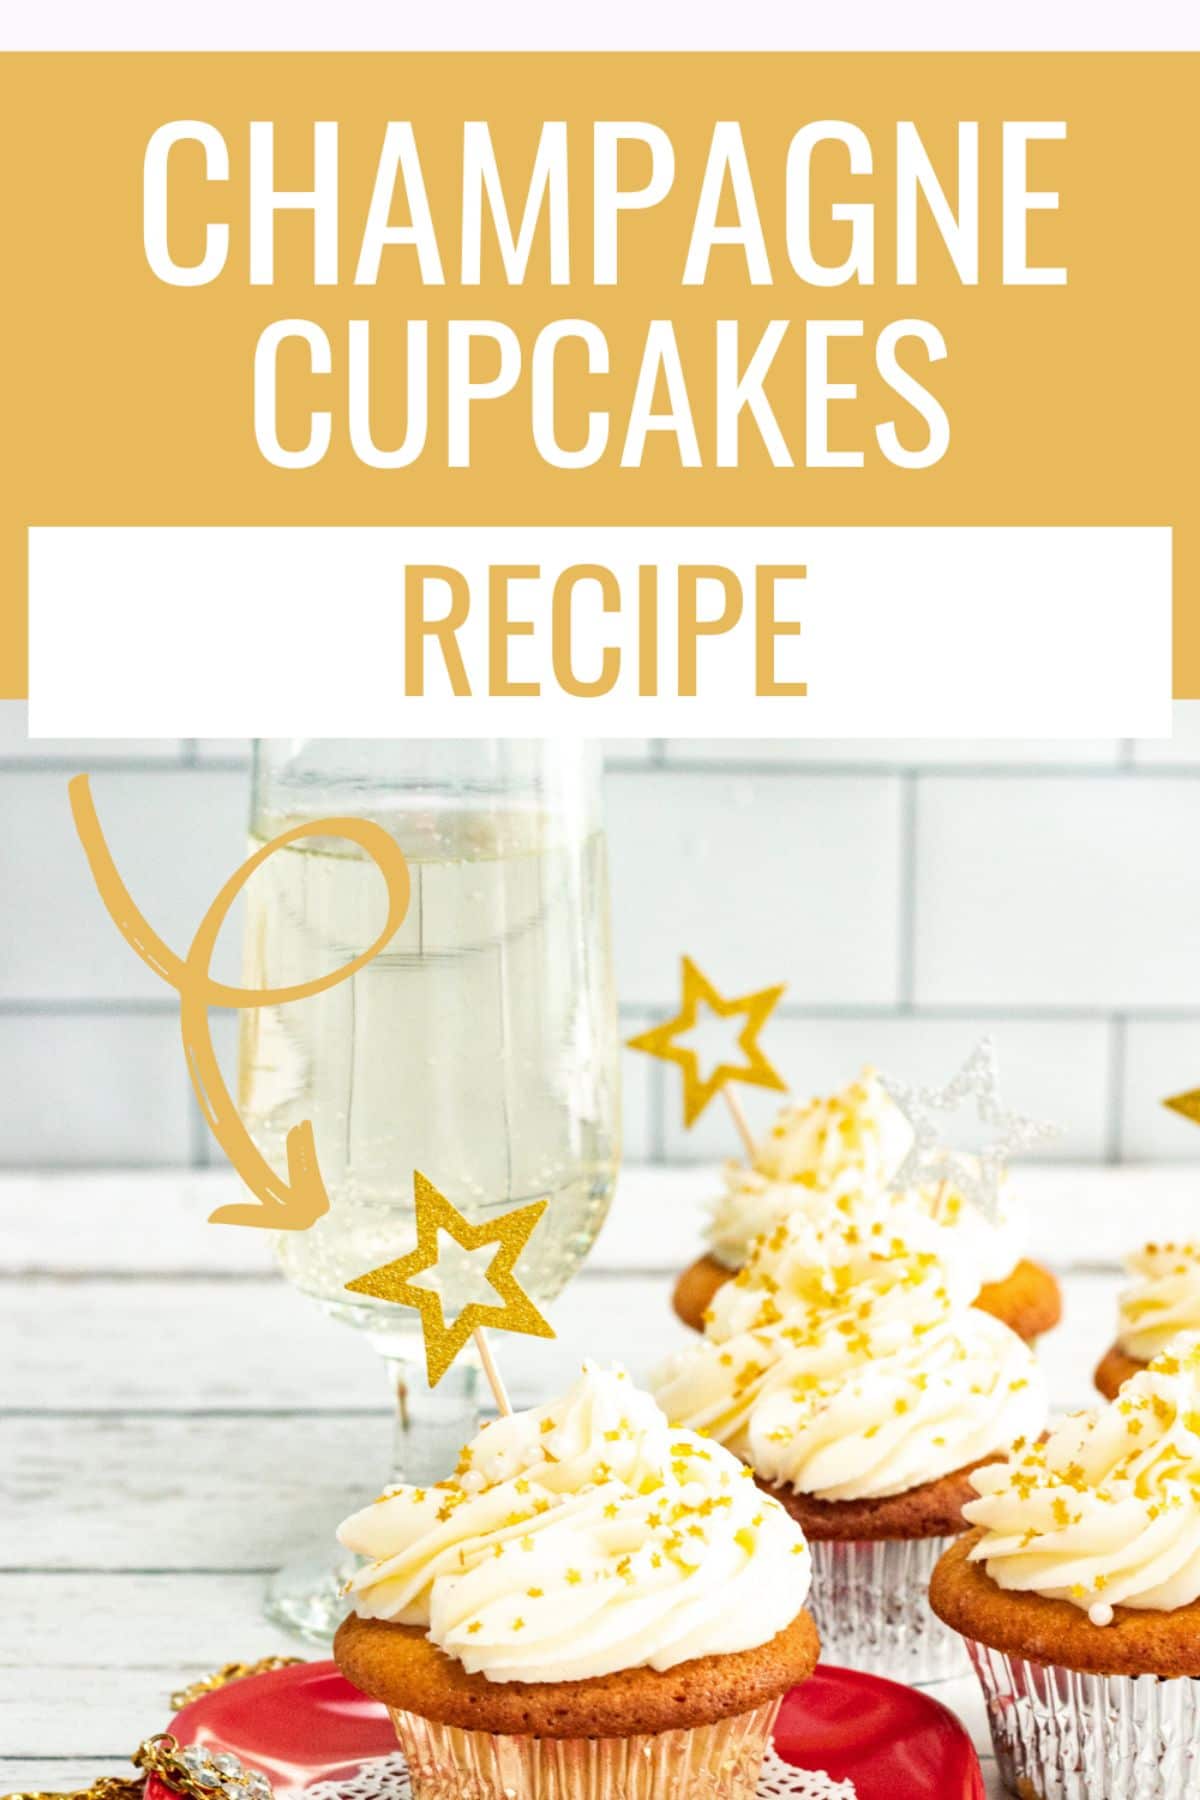 Champagne Cupcakes are soft cupcakes that are topped with sweet and flavor icing. If you like champagne and cake then this recipe is for you. #champagne #cupcakes #champagnecupcakes #recipe #newyearseve via @wondermomwannab